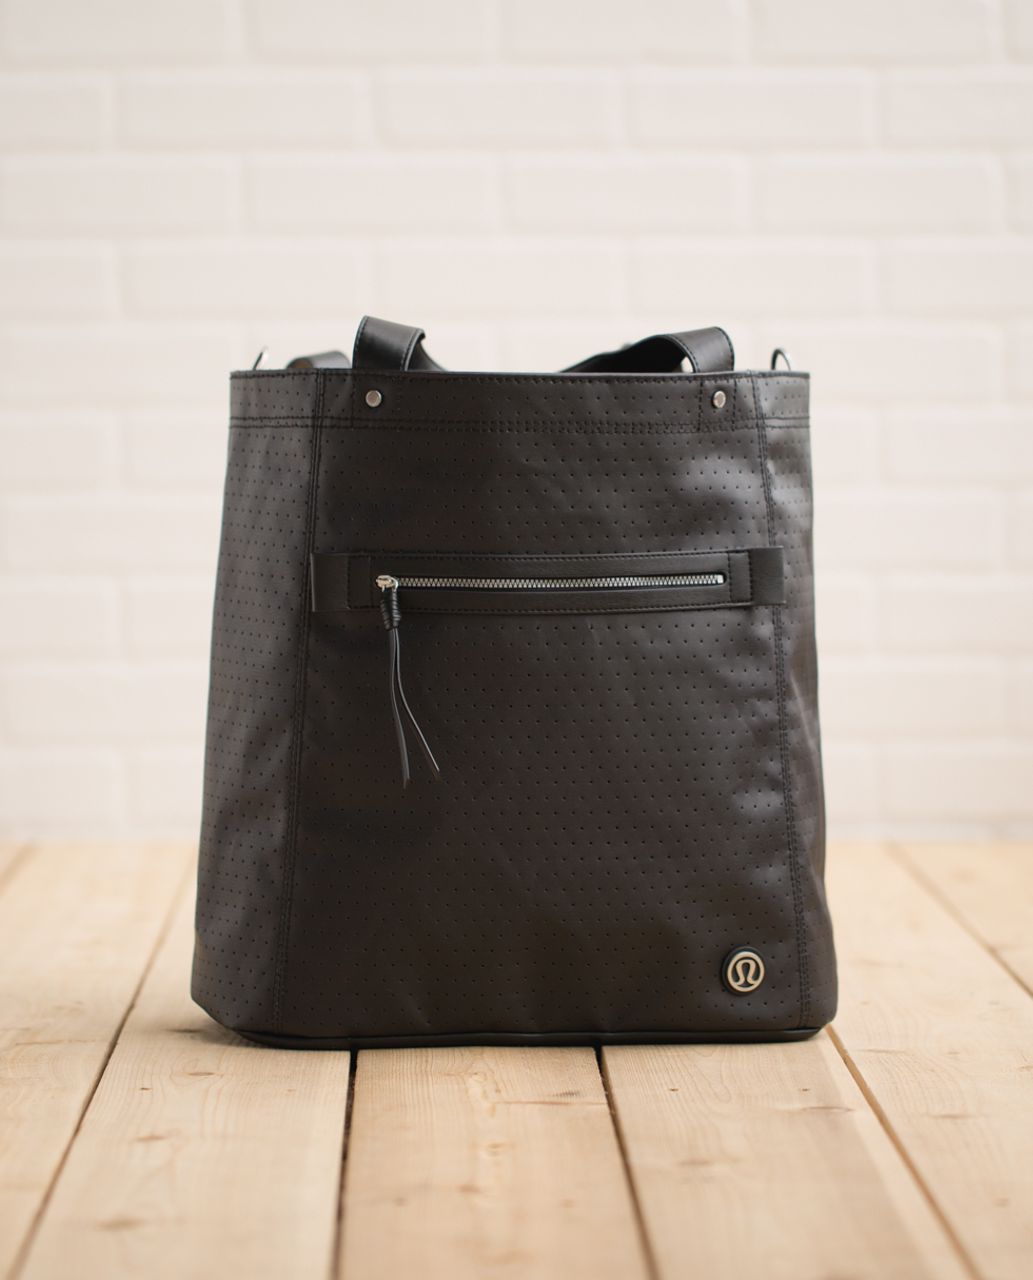 Lululemon Out & About Tote - Black